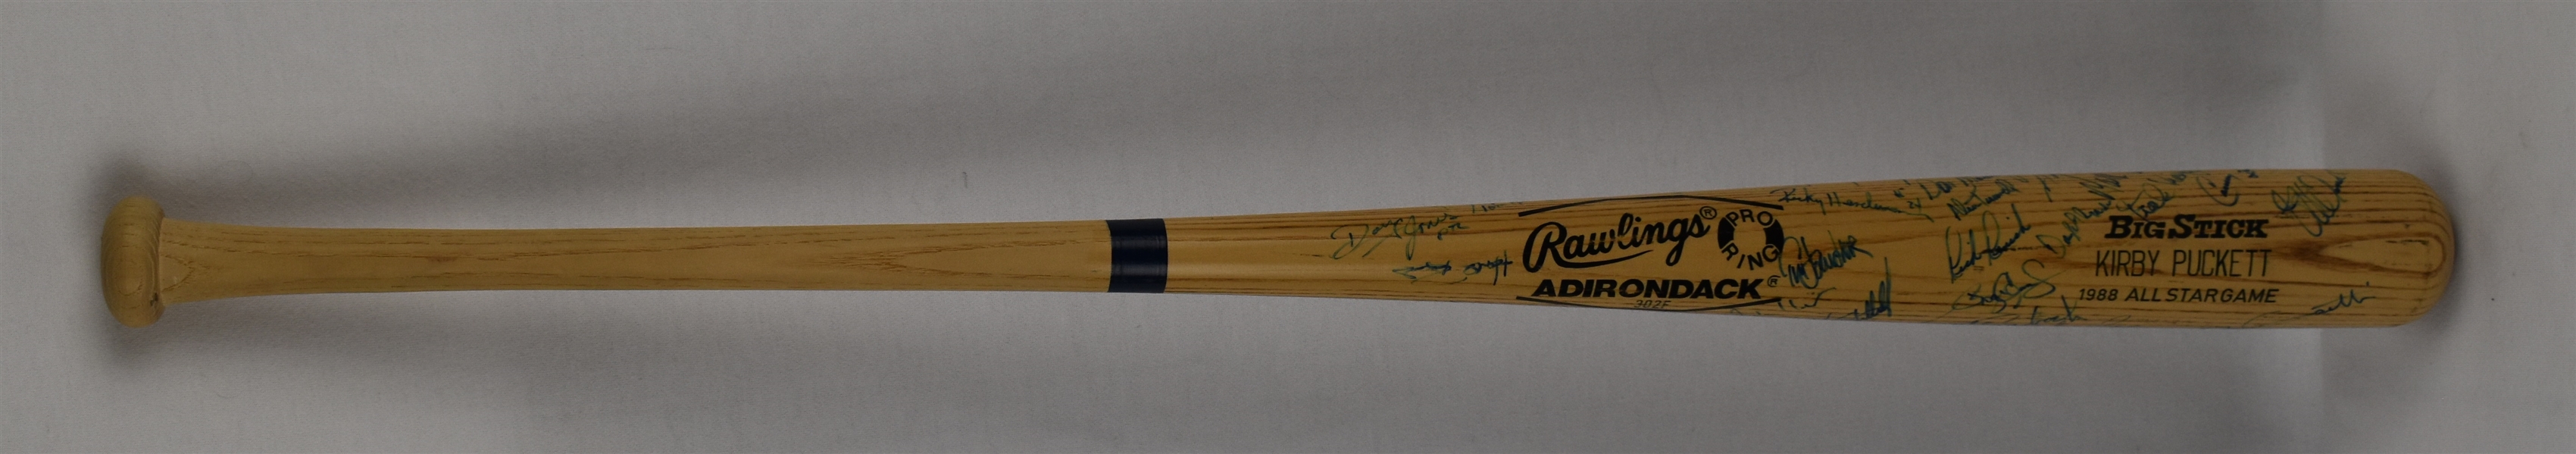 Kirby Puckett 1988 American League All Star Bat Signed by the AL All Star Team w/Puckett Family Provenance